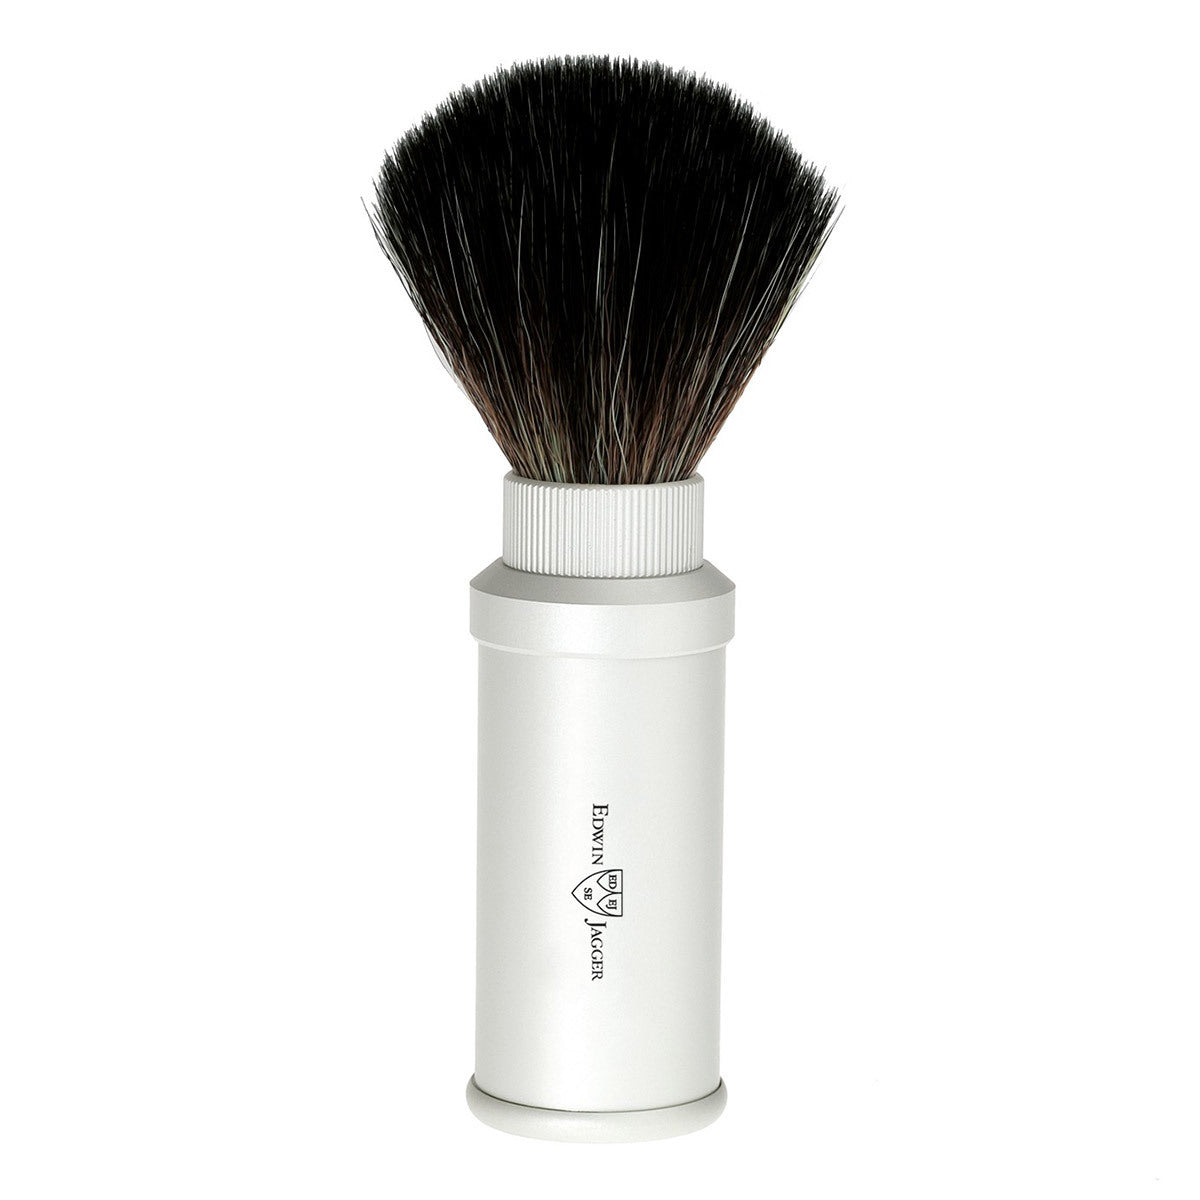 Primary image of Synthetic Travel Shaving Brush (Silver)